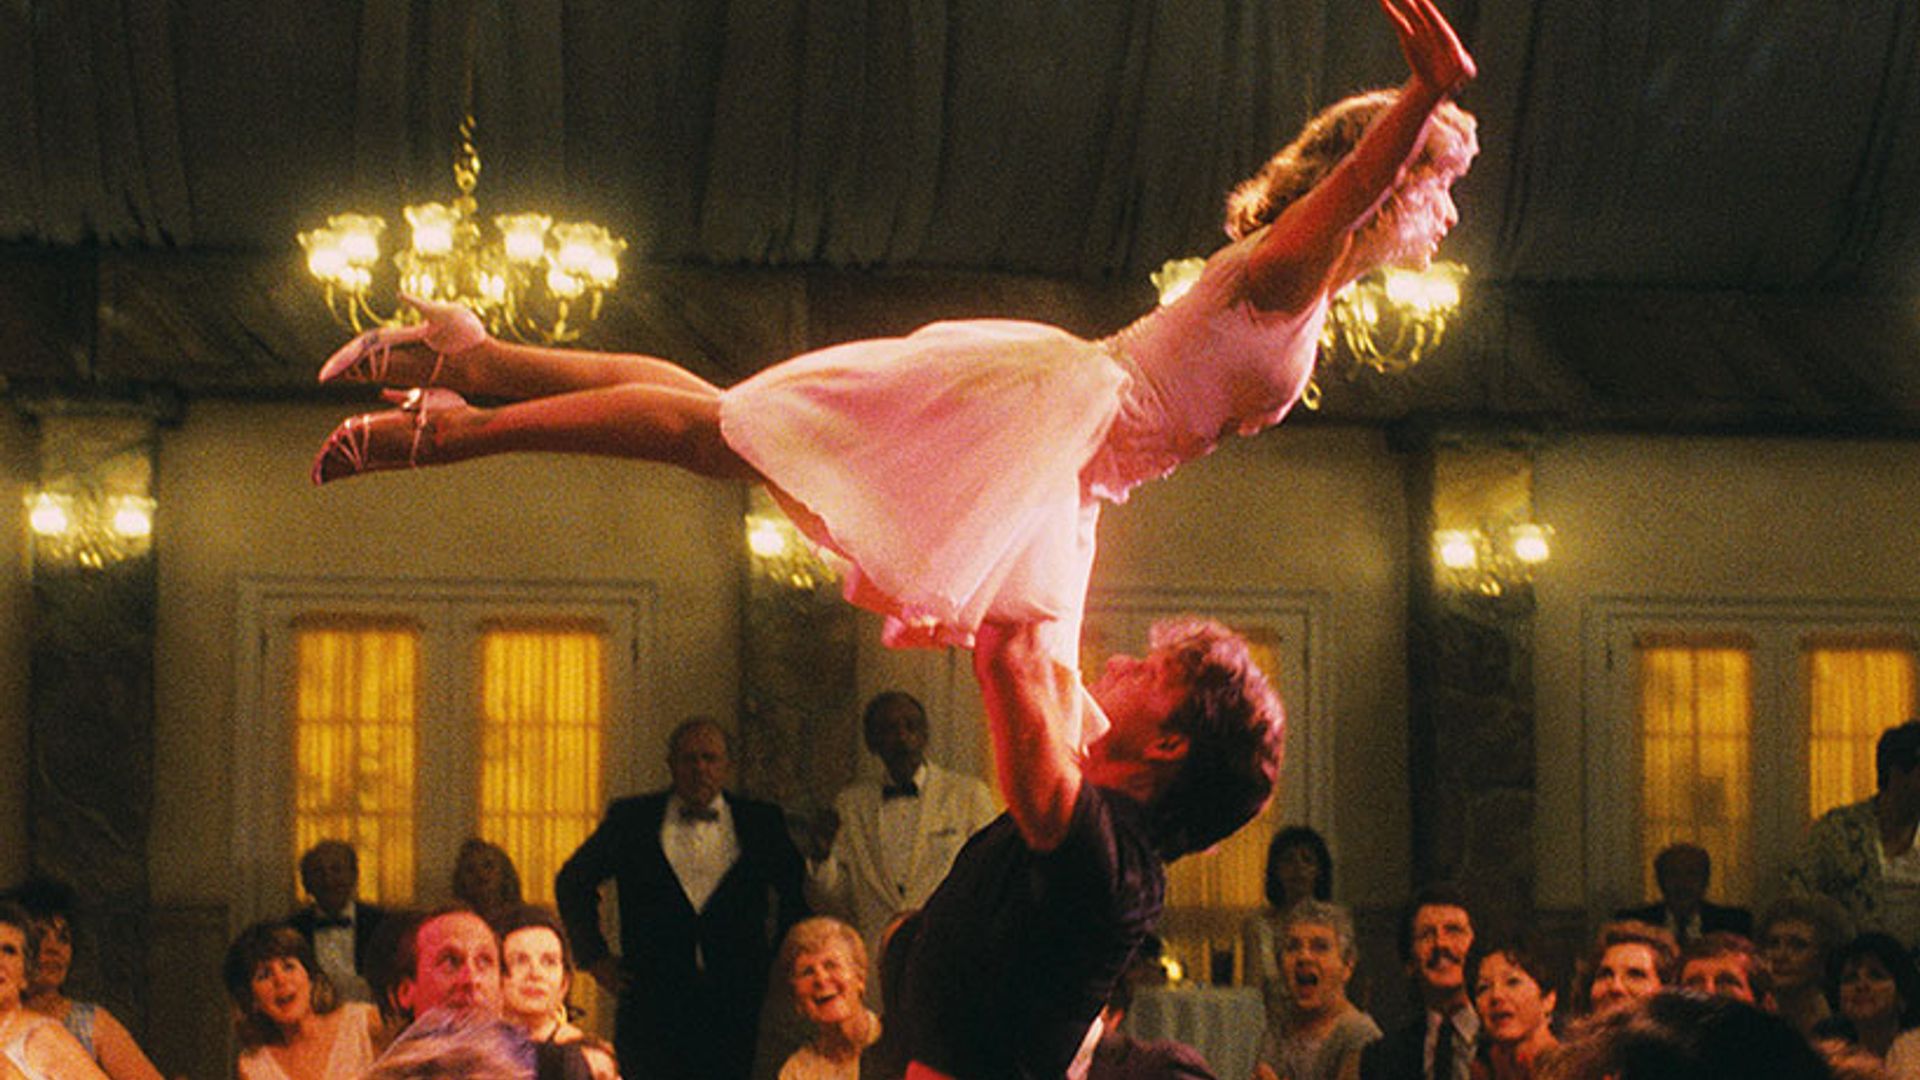 Dirty Dancing remake is in the works: everything you need to know